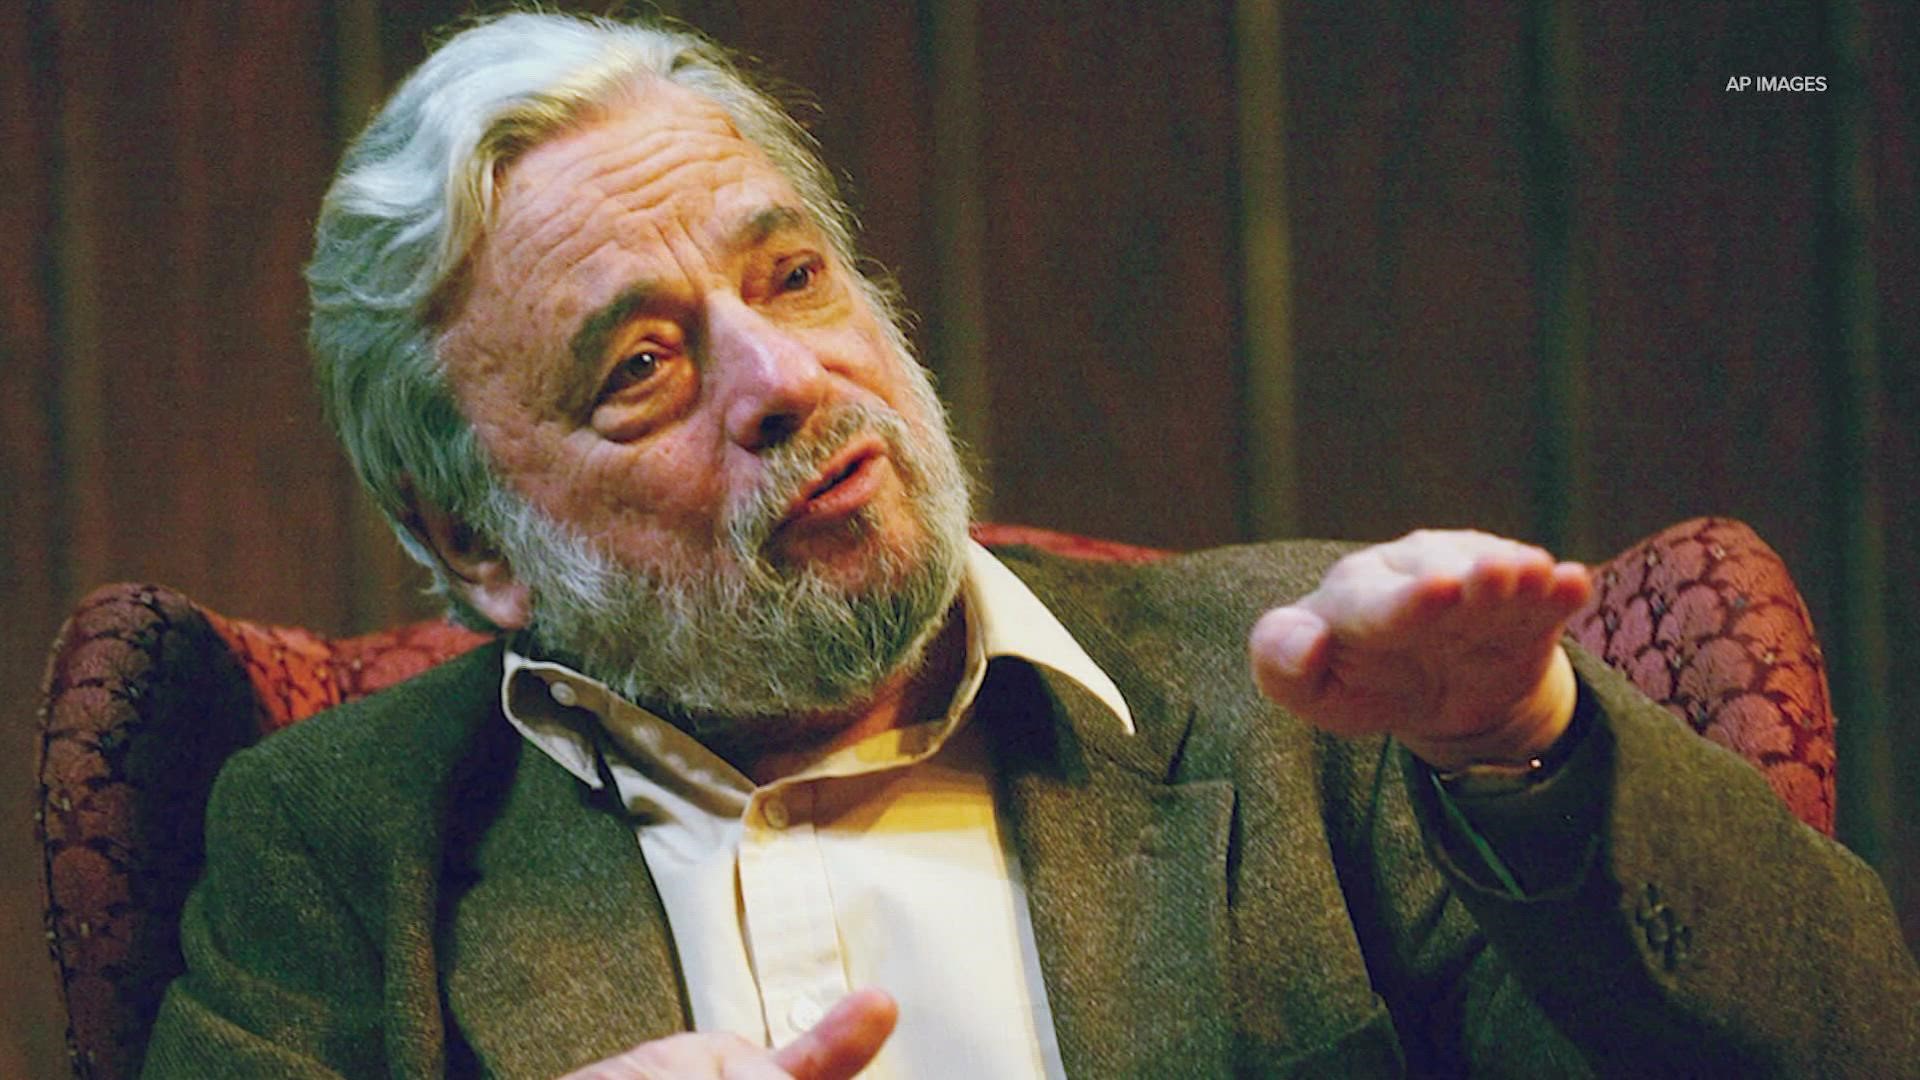 Sondheim influenced generations of theater songwriters, particularly with such landmark musicals as “Company,” “Follies” and “Sweeney Todd."